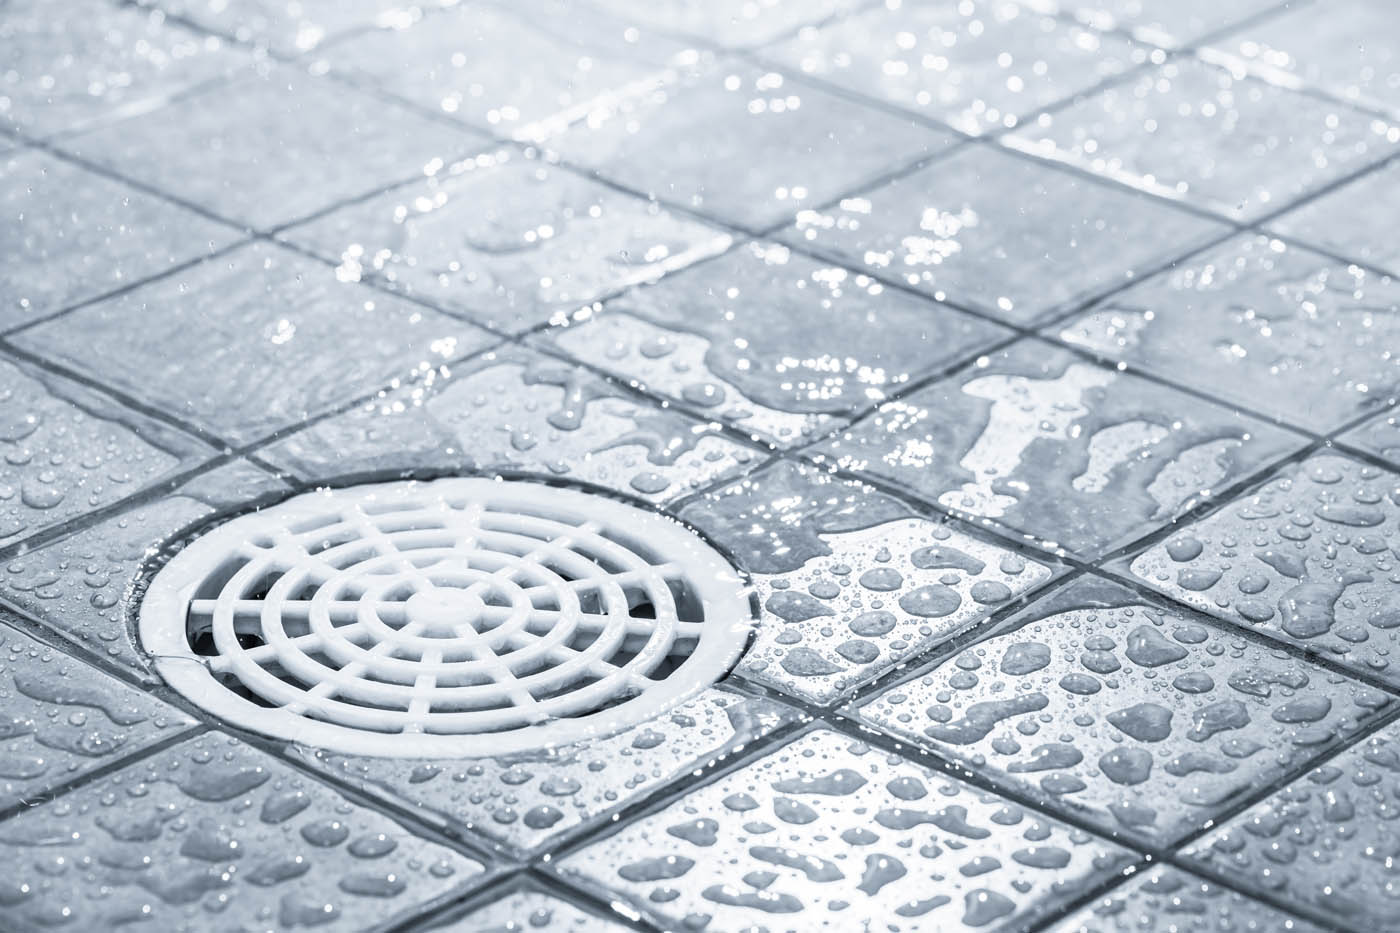 WyattWorks drain cleaning in Parma / Seven Hills, OH, prevent your bathroom floor from flooding.